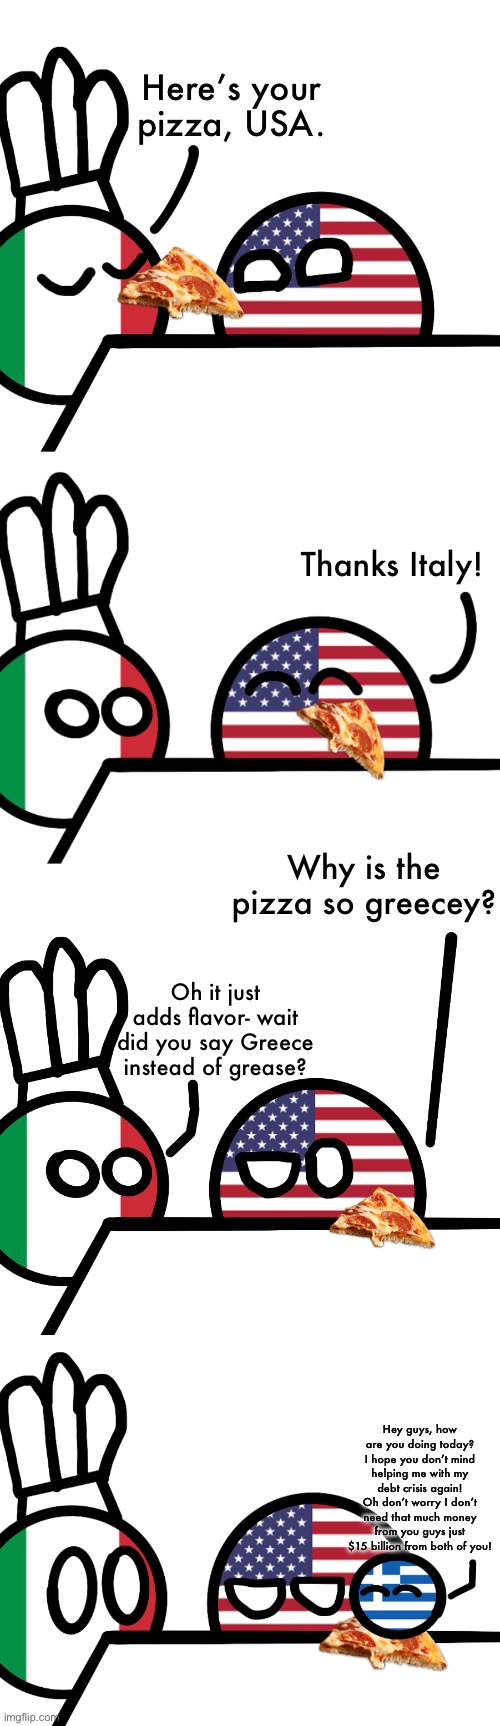 My first post here! This comic was made by me. | Here’s your pizza, USA. Thanks Italy! Why is the pizza so greecey? Oh it just adds flavor- wait did you say Greece instead of grease? Hey guys, how are you doing today? I hope you don’t mind helping me with my debt crisis again! Oh don’t worry I don’t need that much money from you guys just $15 billion from both of you! | made w/ Imgflip meme maker